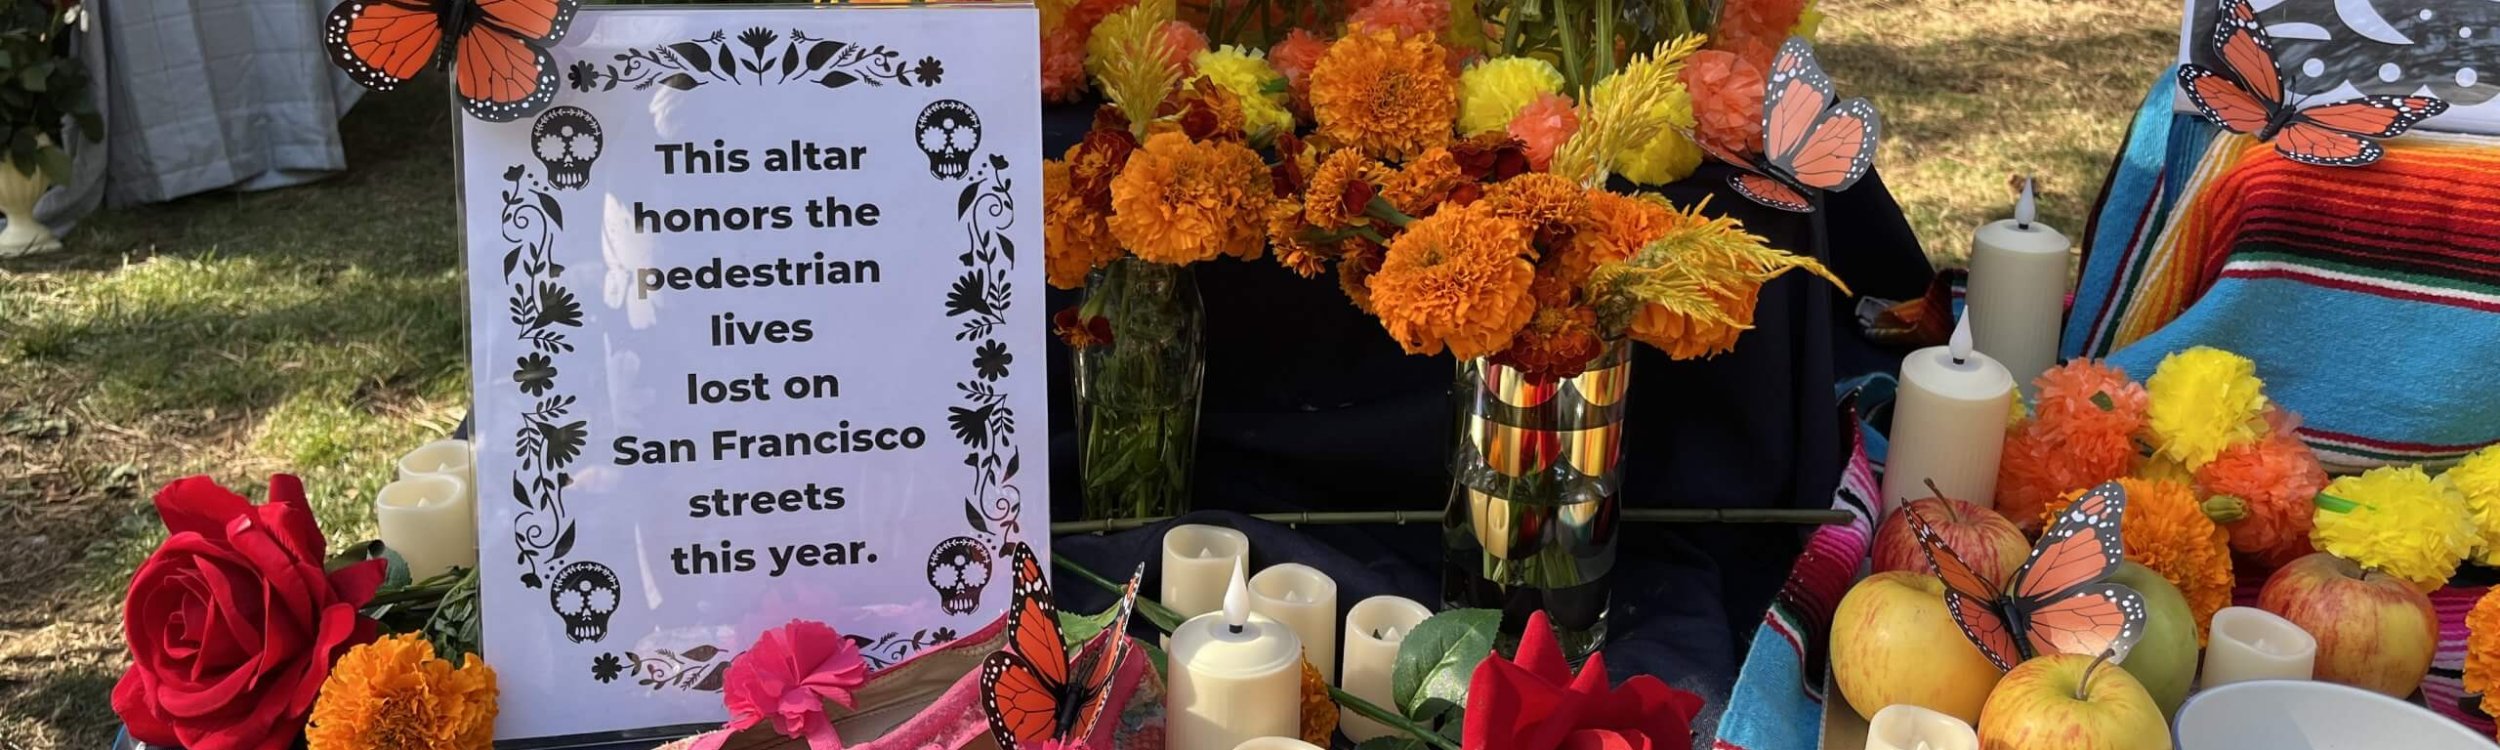 Our first altar at Dia de los Muertos honored the 16 pedestrians killed so far in 2023